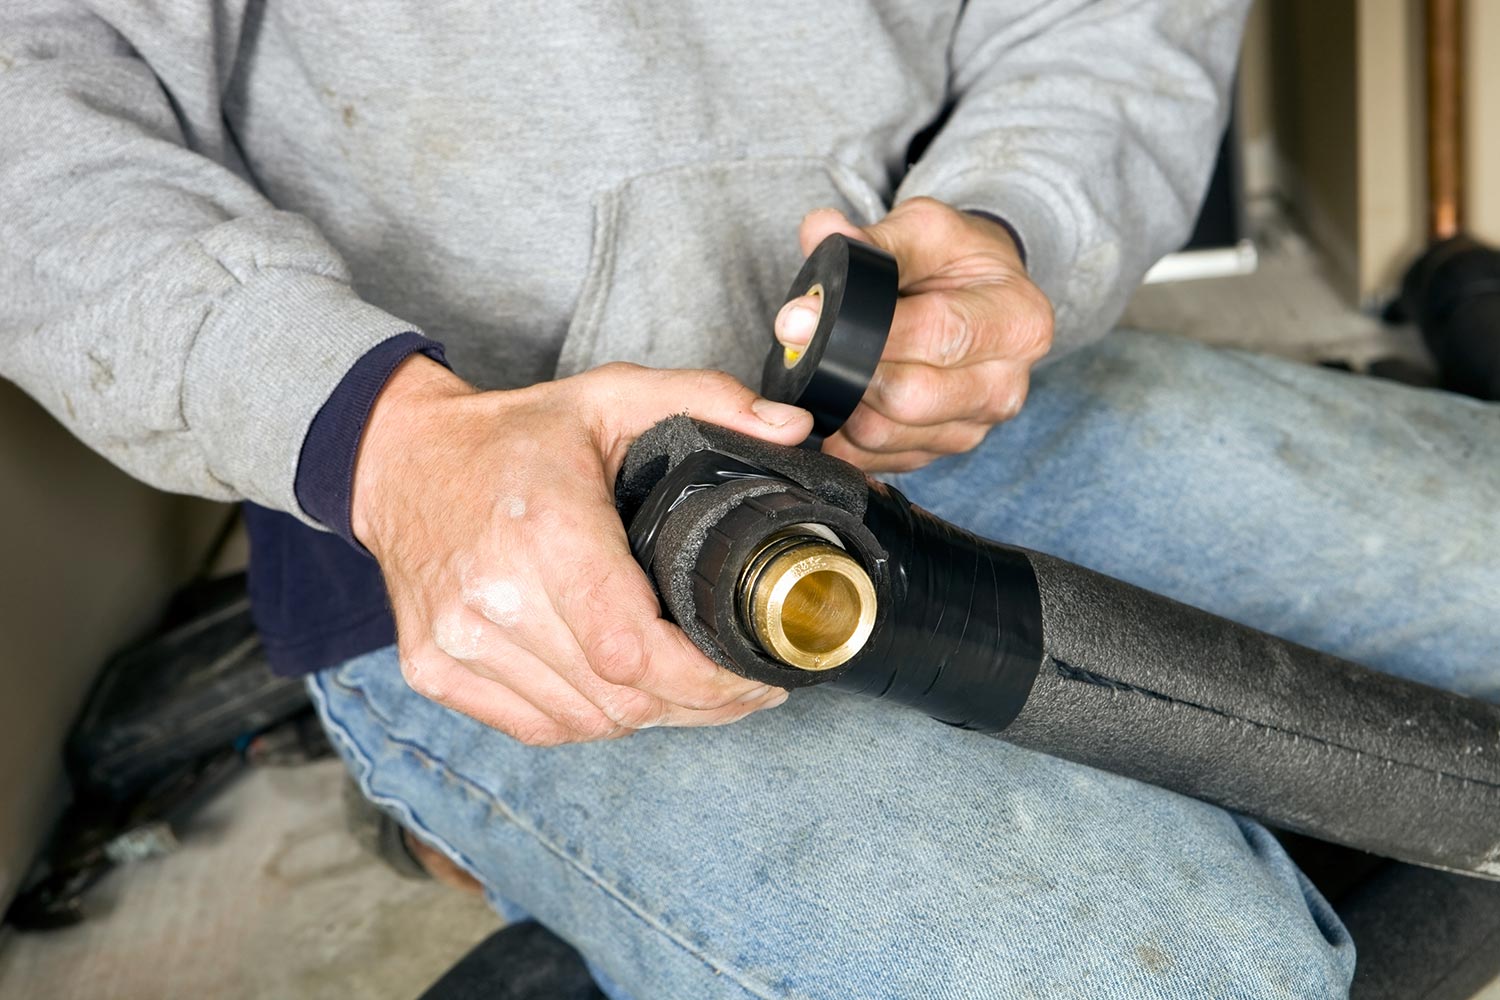 Plumber fastening pipe insulation with electrical tape